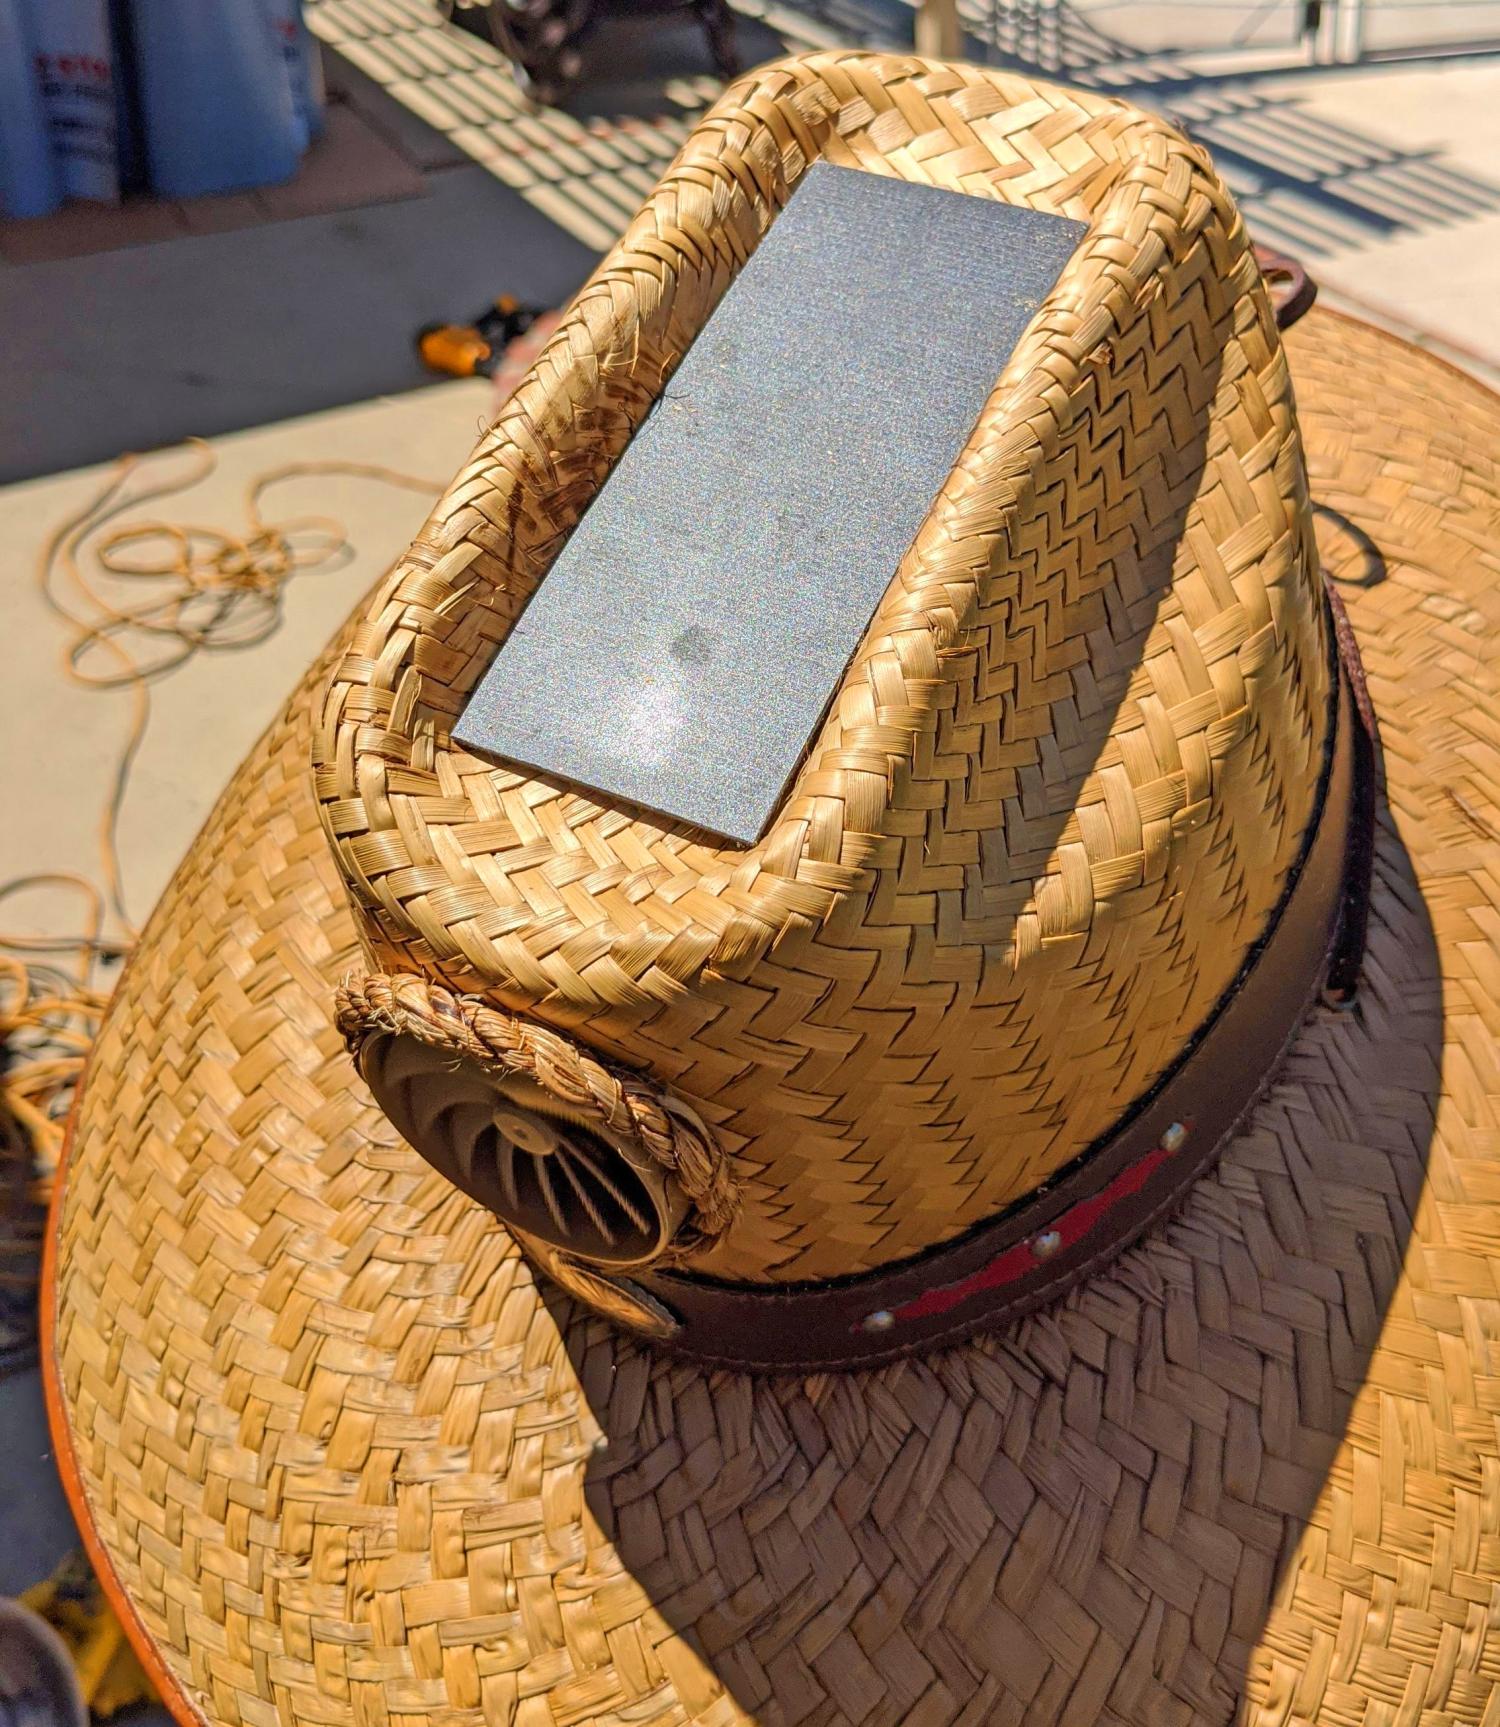 Solar Powered Straw Hat With Fan - Cowboy hat with built-in fan to keep your head cool